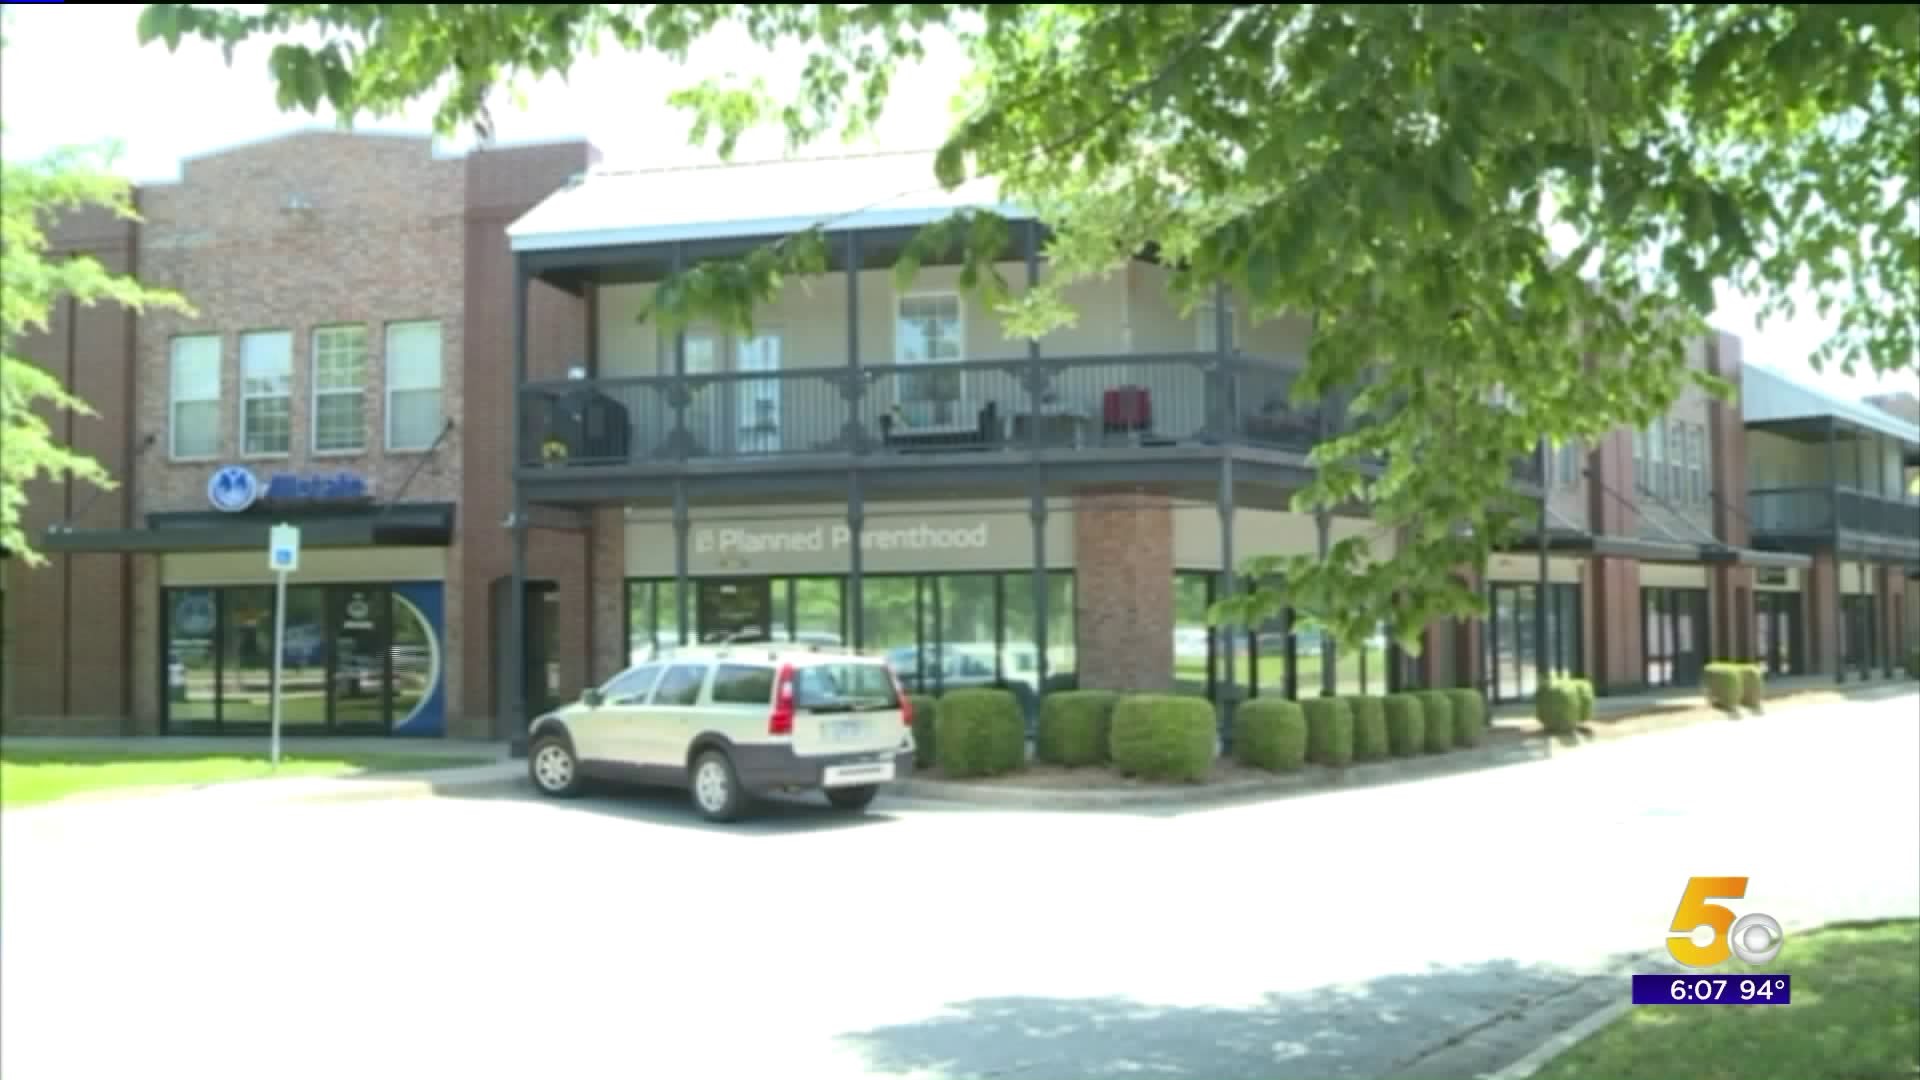 New Planned Parenthood Location in Little Rock